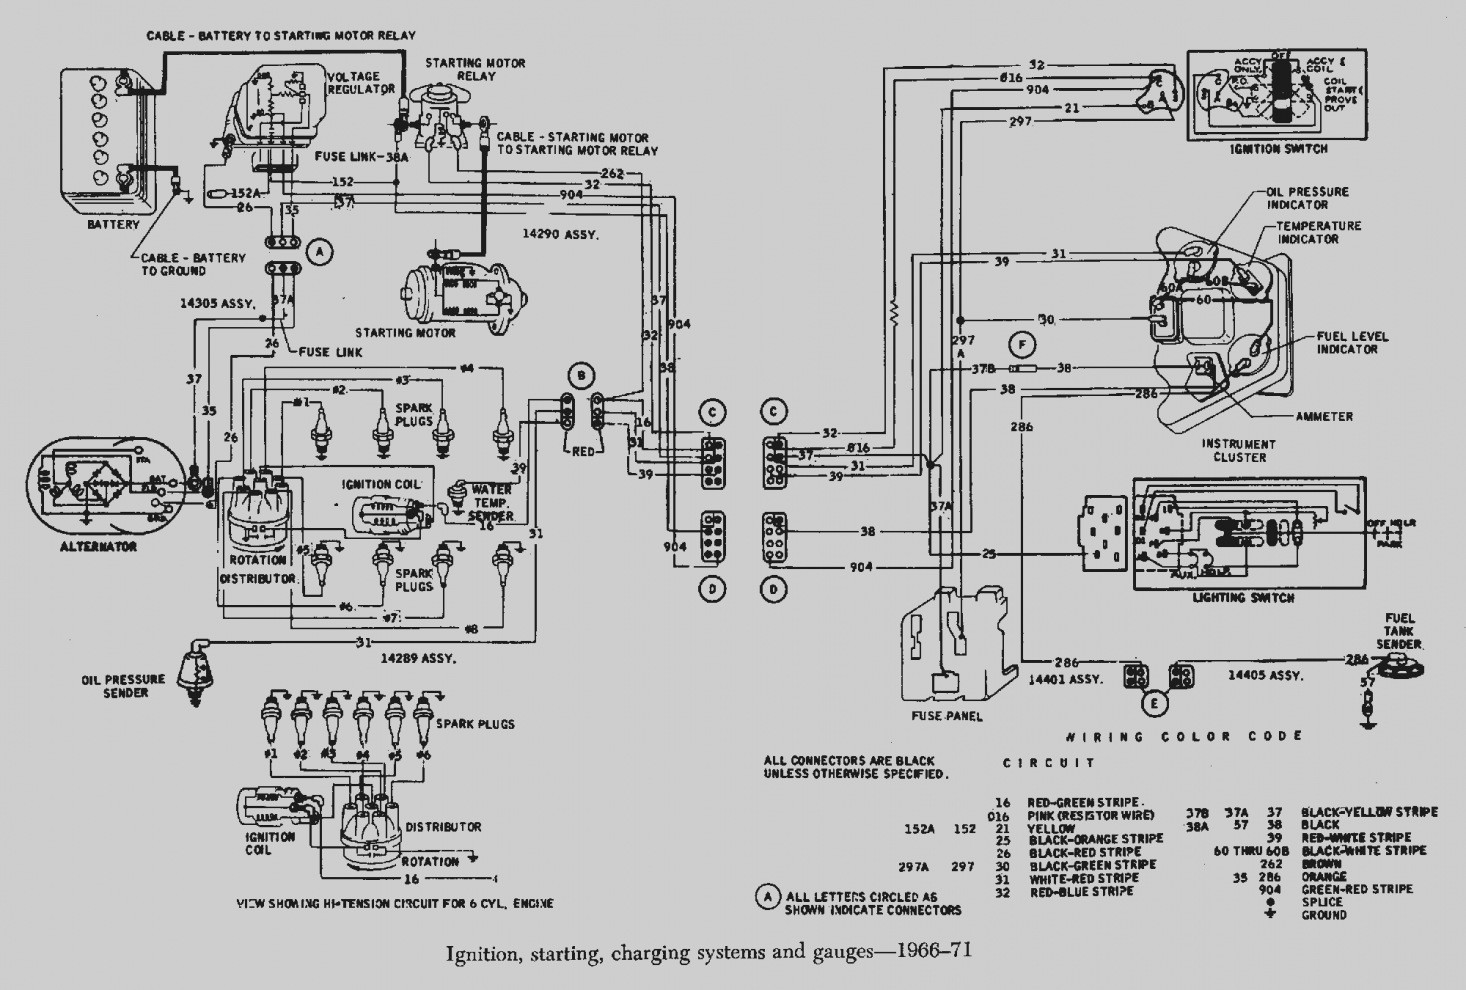 Elegant Chevy 350 Plug Wire Diagram Wiring Diagram For Gm 350 Free Download Wiring Diagrams